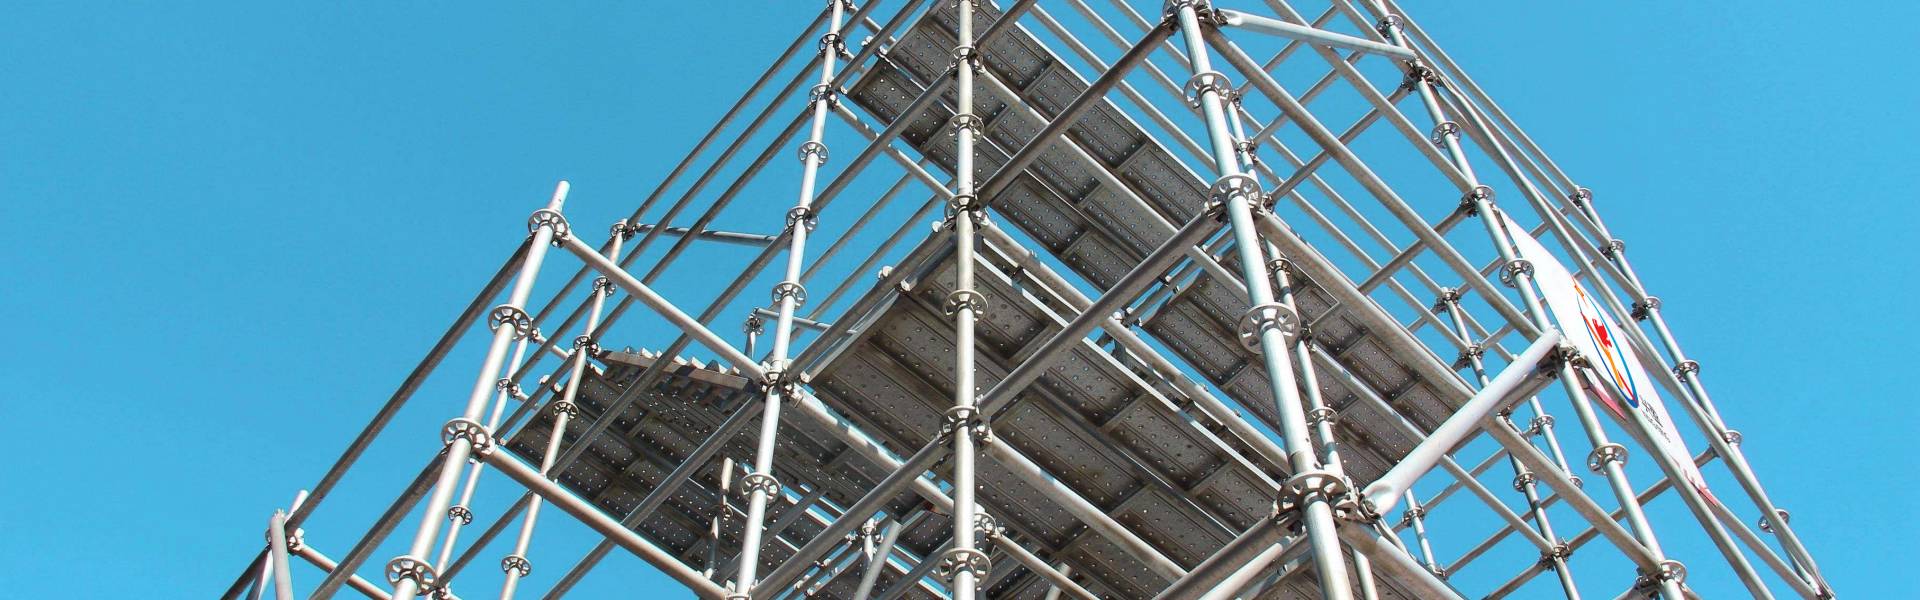 A erected ringlock scaffolding is displayed against the blue sky.